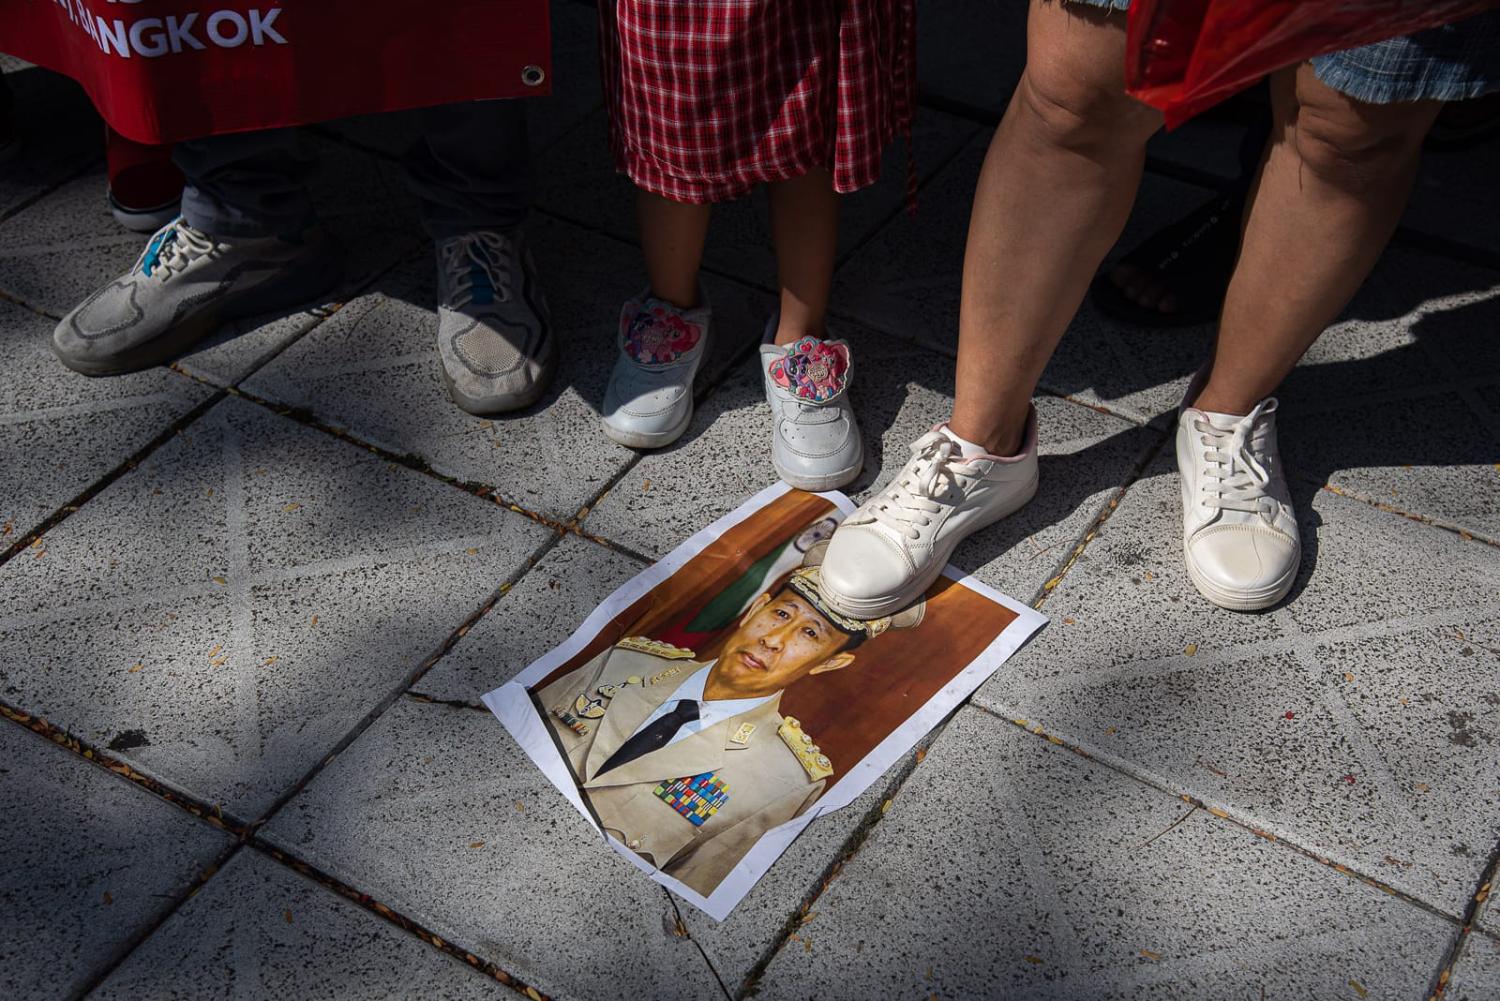 Protesters step on a portrait of General Soe Win, Burmese army general and current Deputy Prime Minister of Myanmar, during the demonstration last month in front of the United Nations building in Bangkok (Peerapon Boonyakiat via Getty Images)